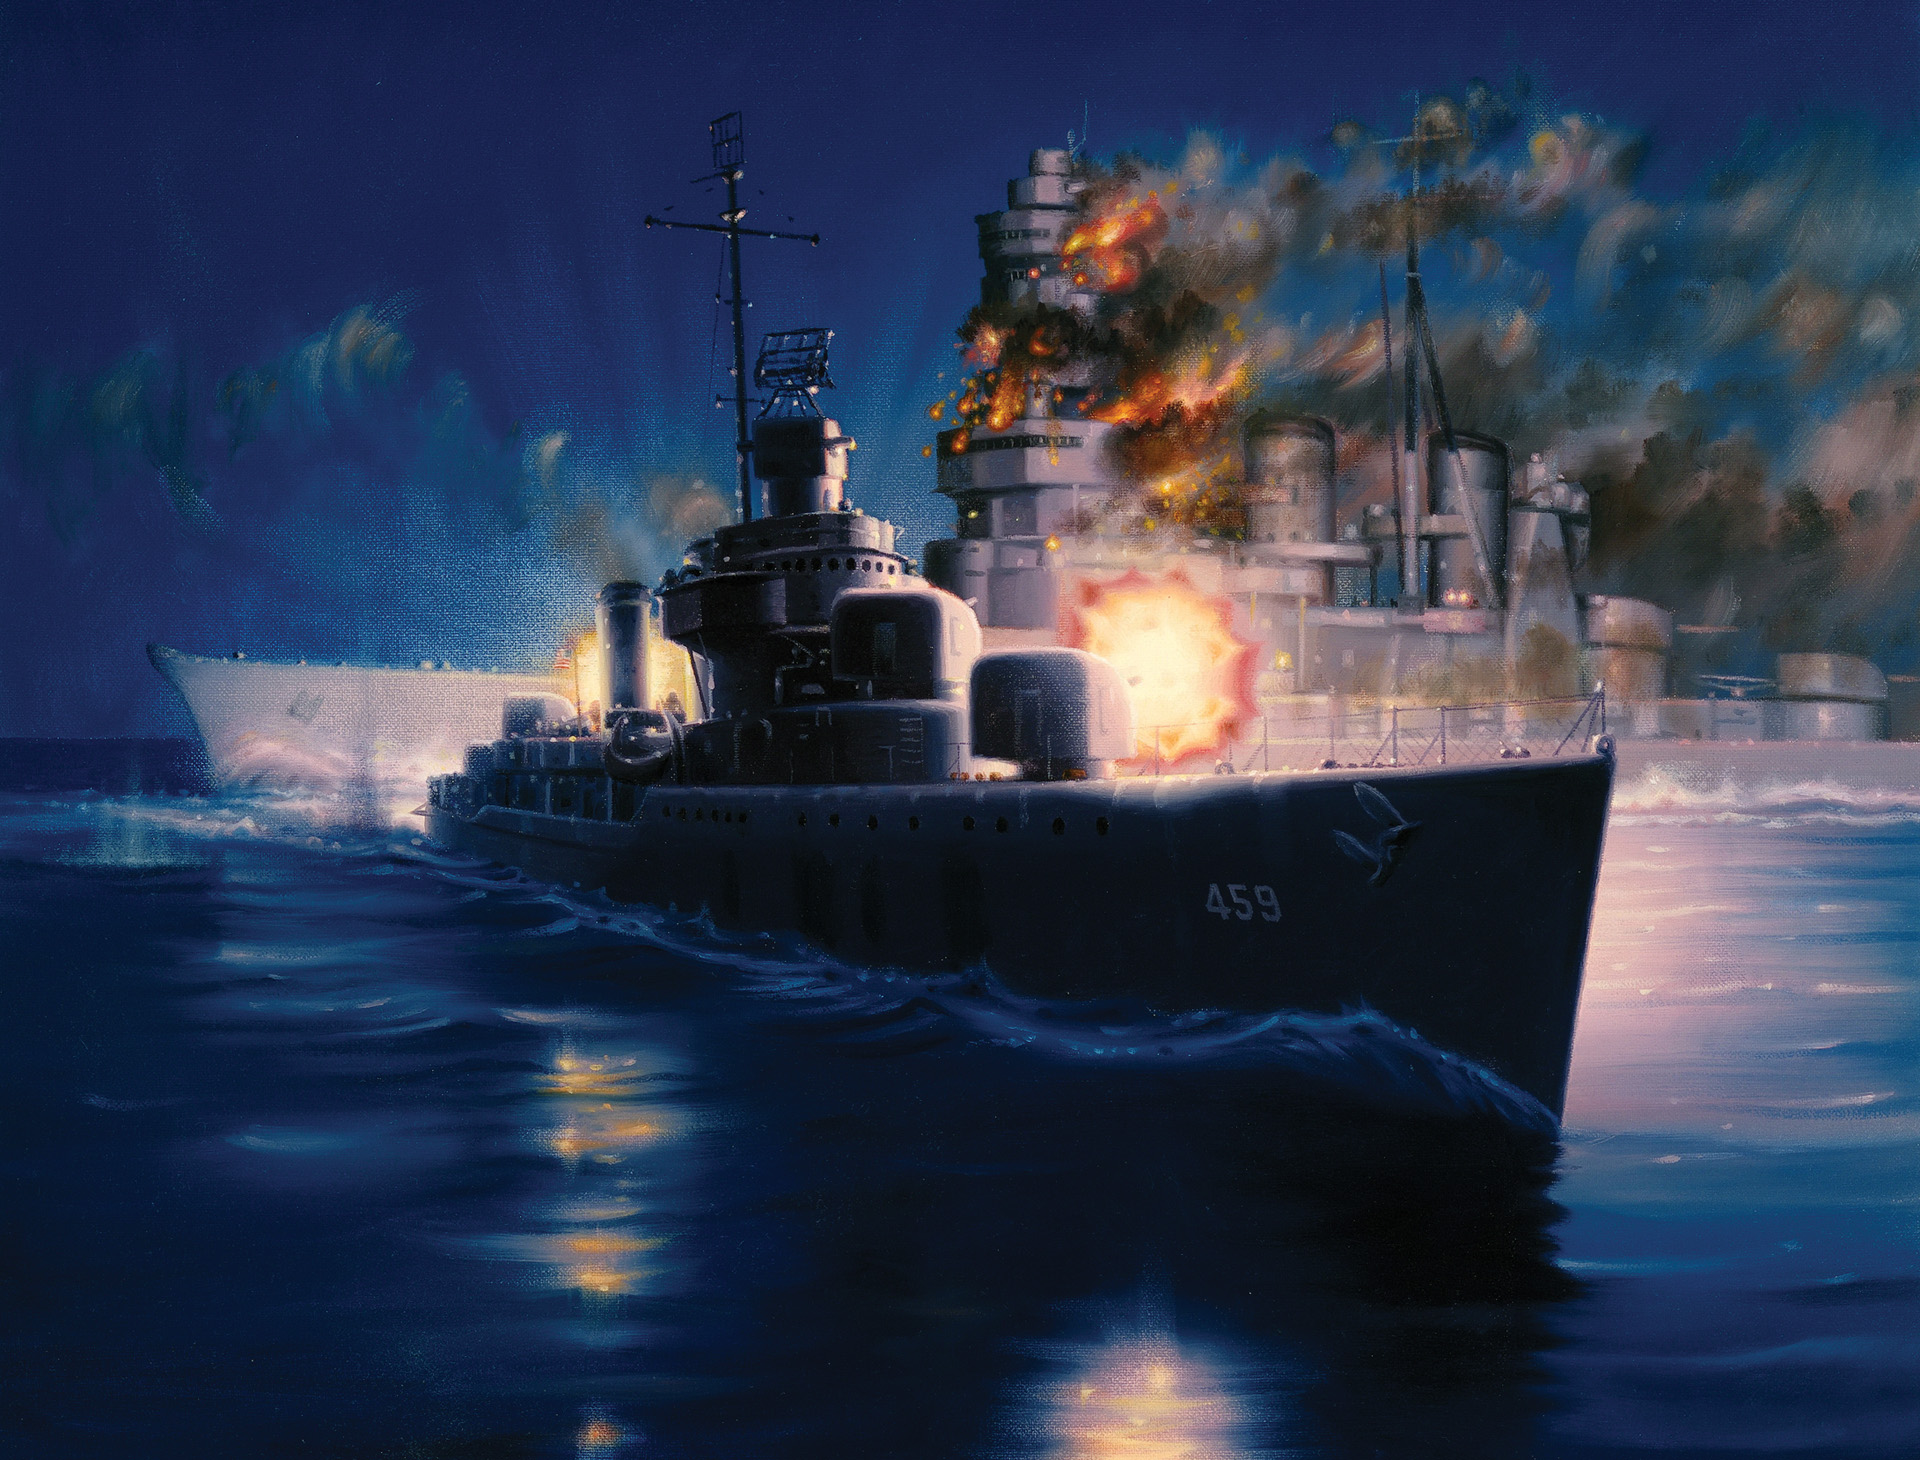 A painting from the U.S. Navy Art Collection depicts the destroyer USS Laffey just after she has crossed under the Japanese battleship Hiei’s bow and engages the larger foe with 5-inch and 20mm gun and sidearms at near point-blank range off Guadalcanal, November 13, 1942.